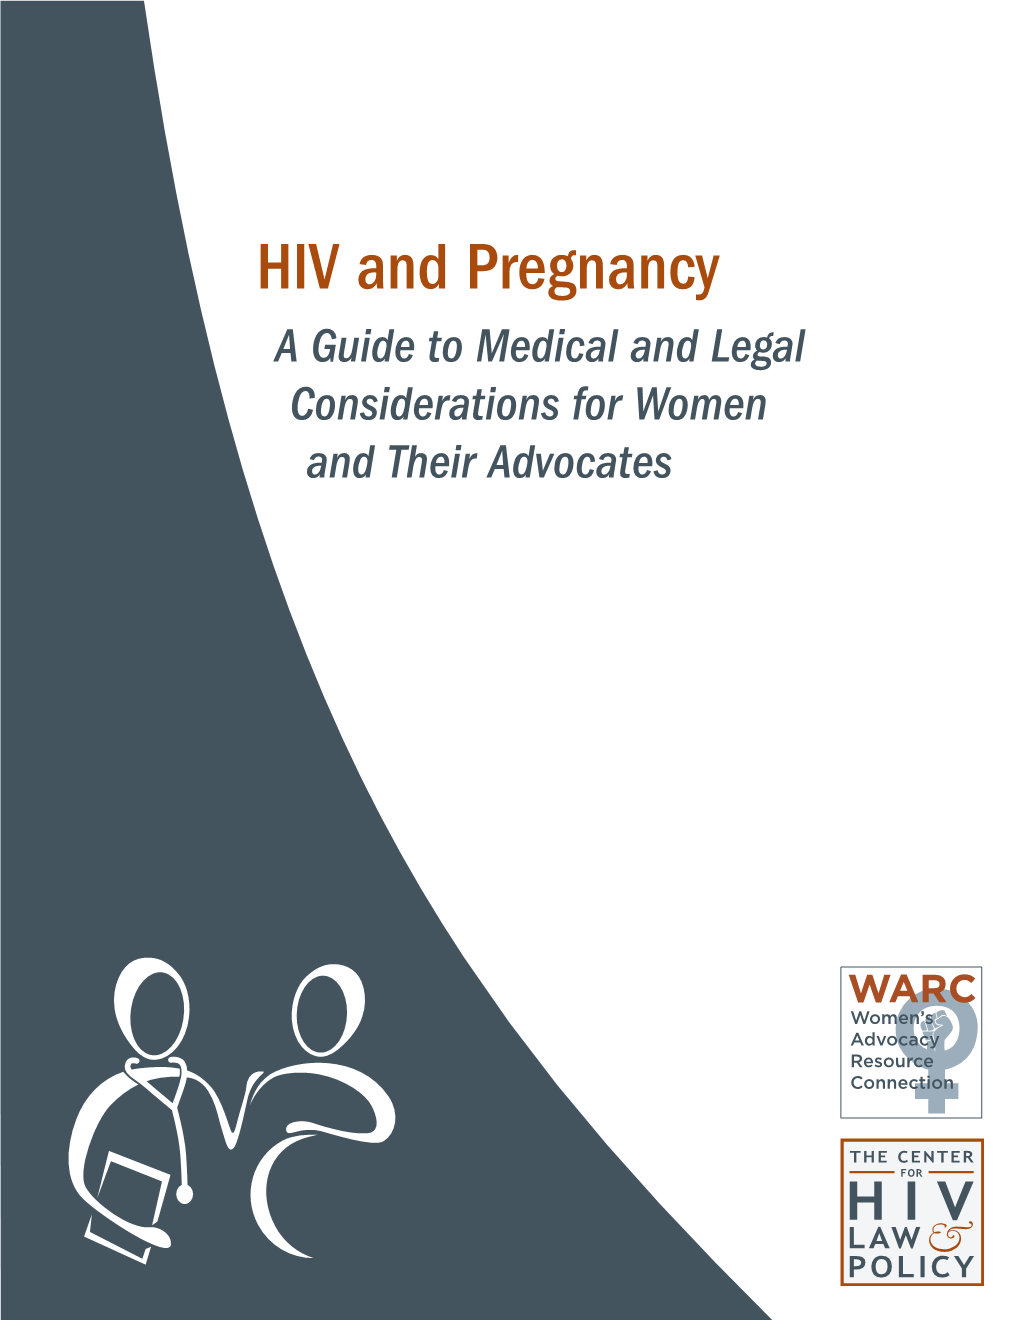 HIV and Pregnancy a Guide to Medical and Legal Considerations for Women and Their Advocates